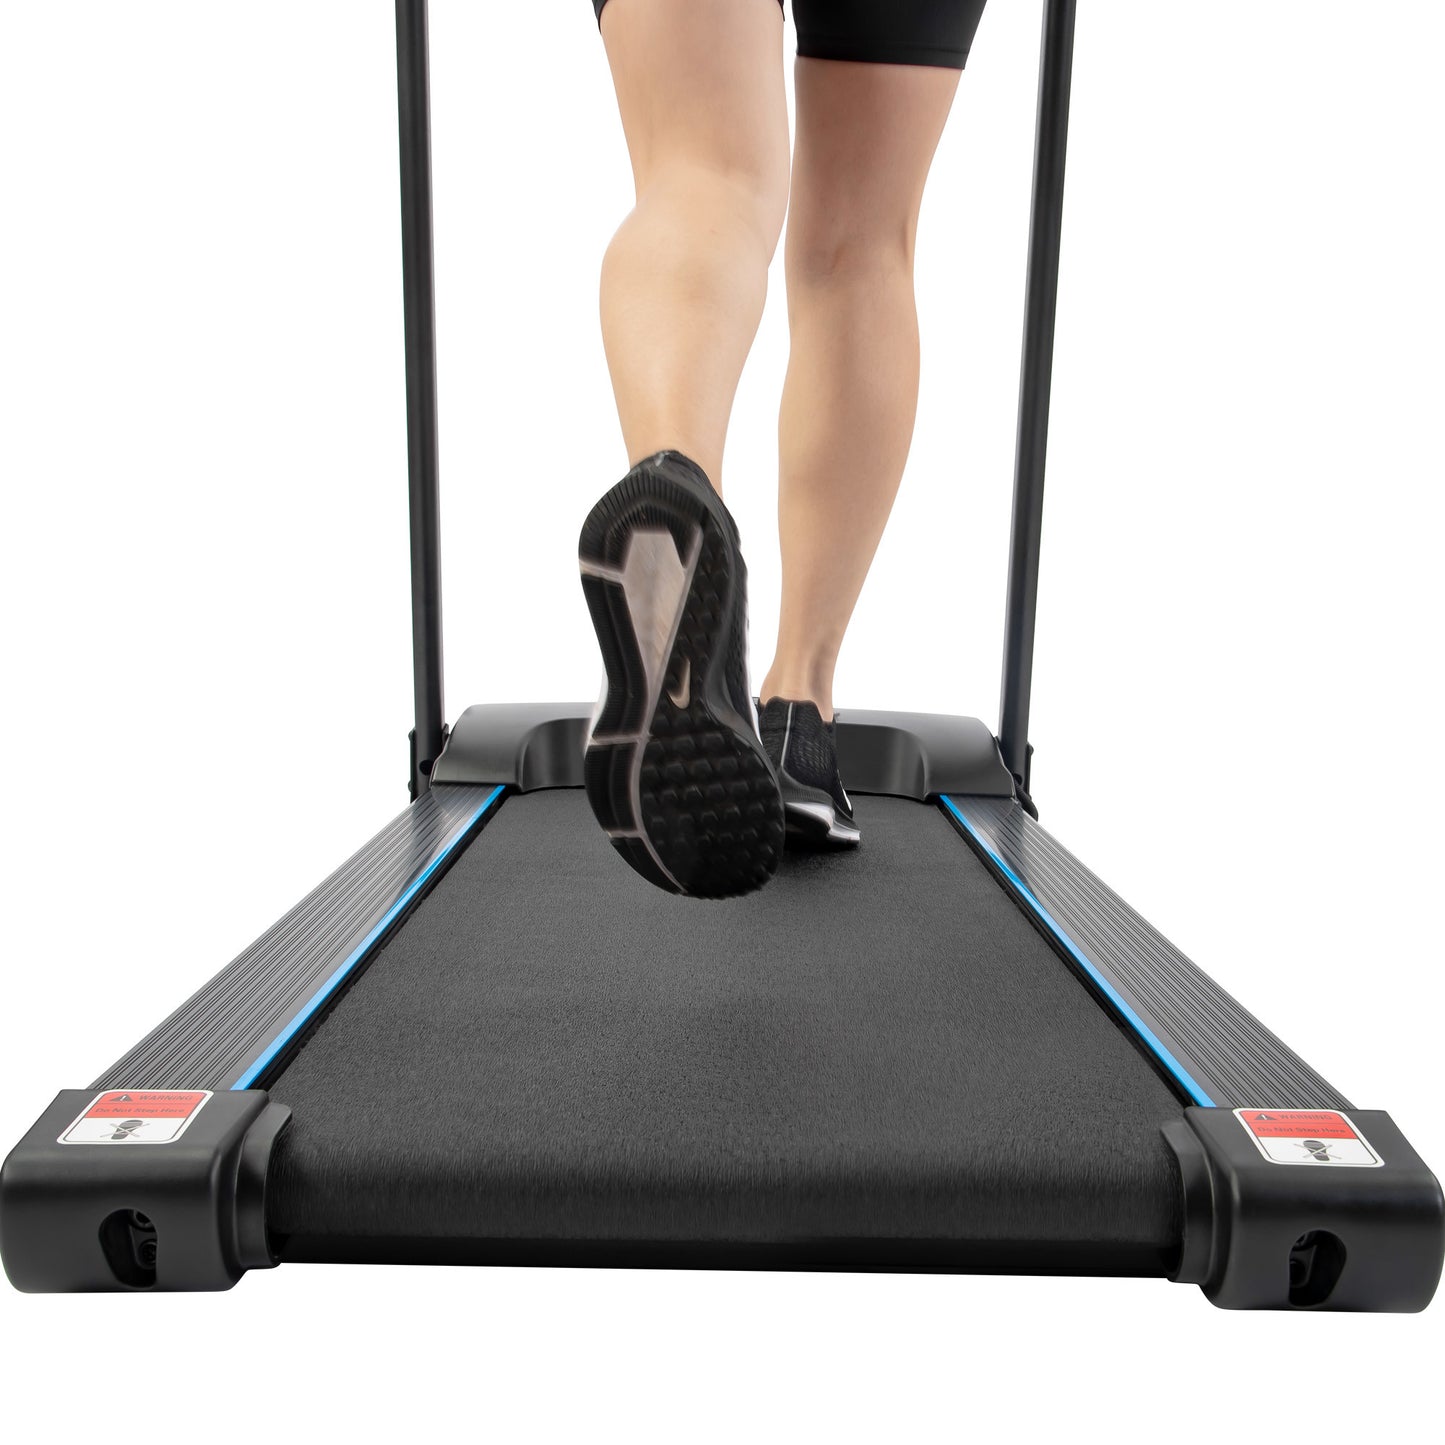 Treadmill with Electric Motorized, Audio Speakers and Incline for Home Gym